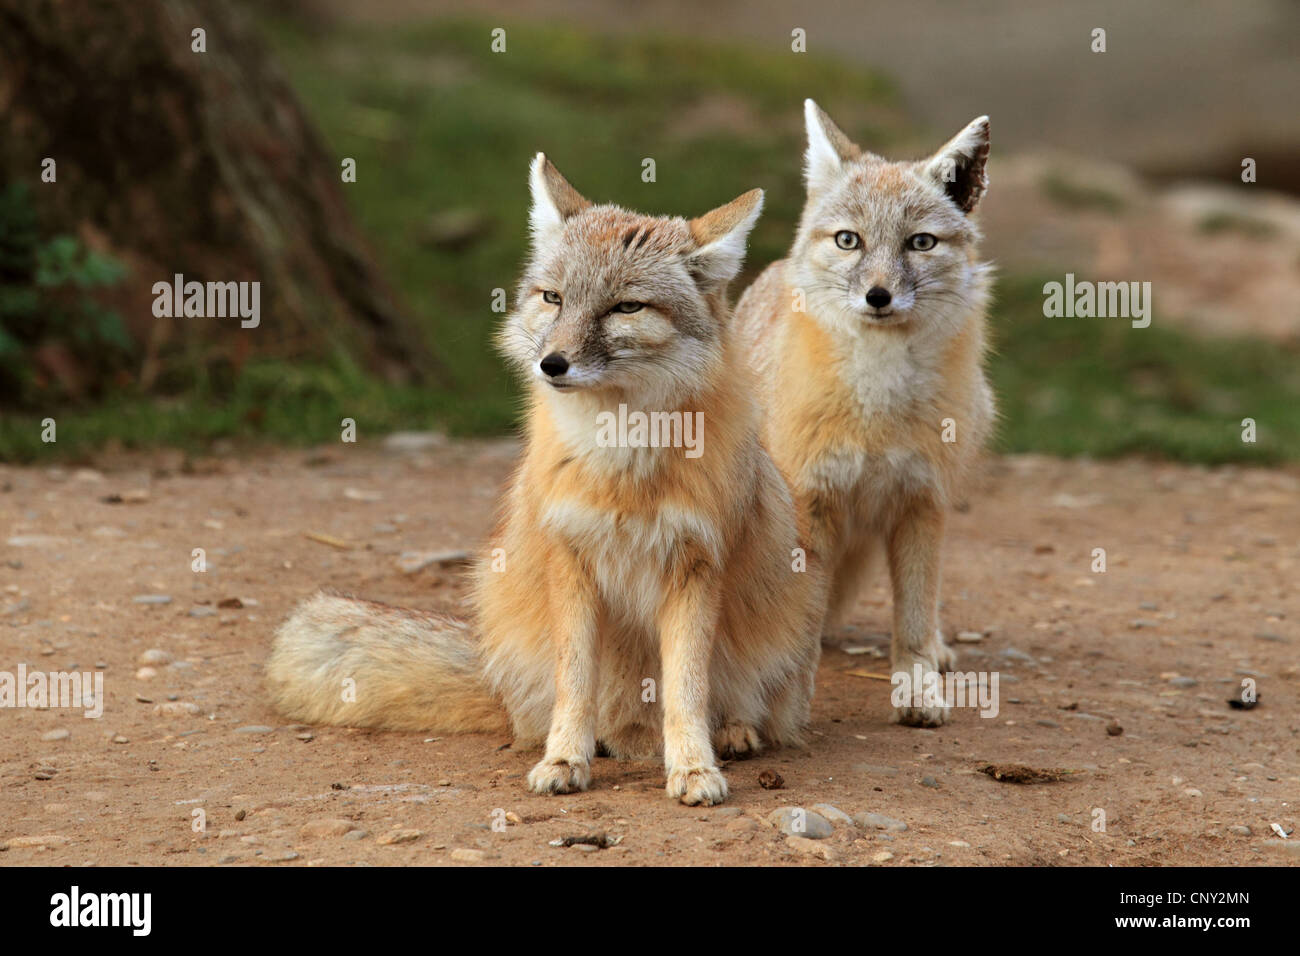 Corsac fox (Vulpes corsac), two steppe foxes sitting side by side Stock Photo